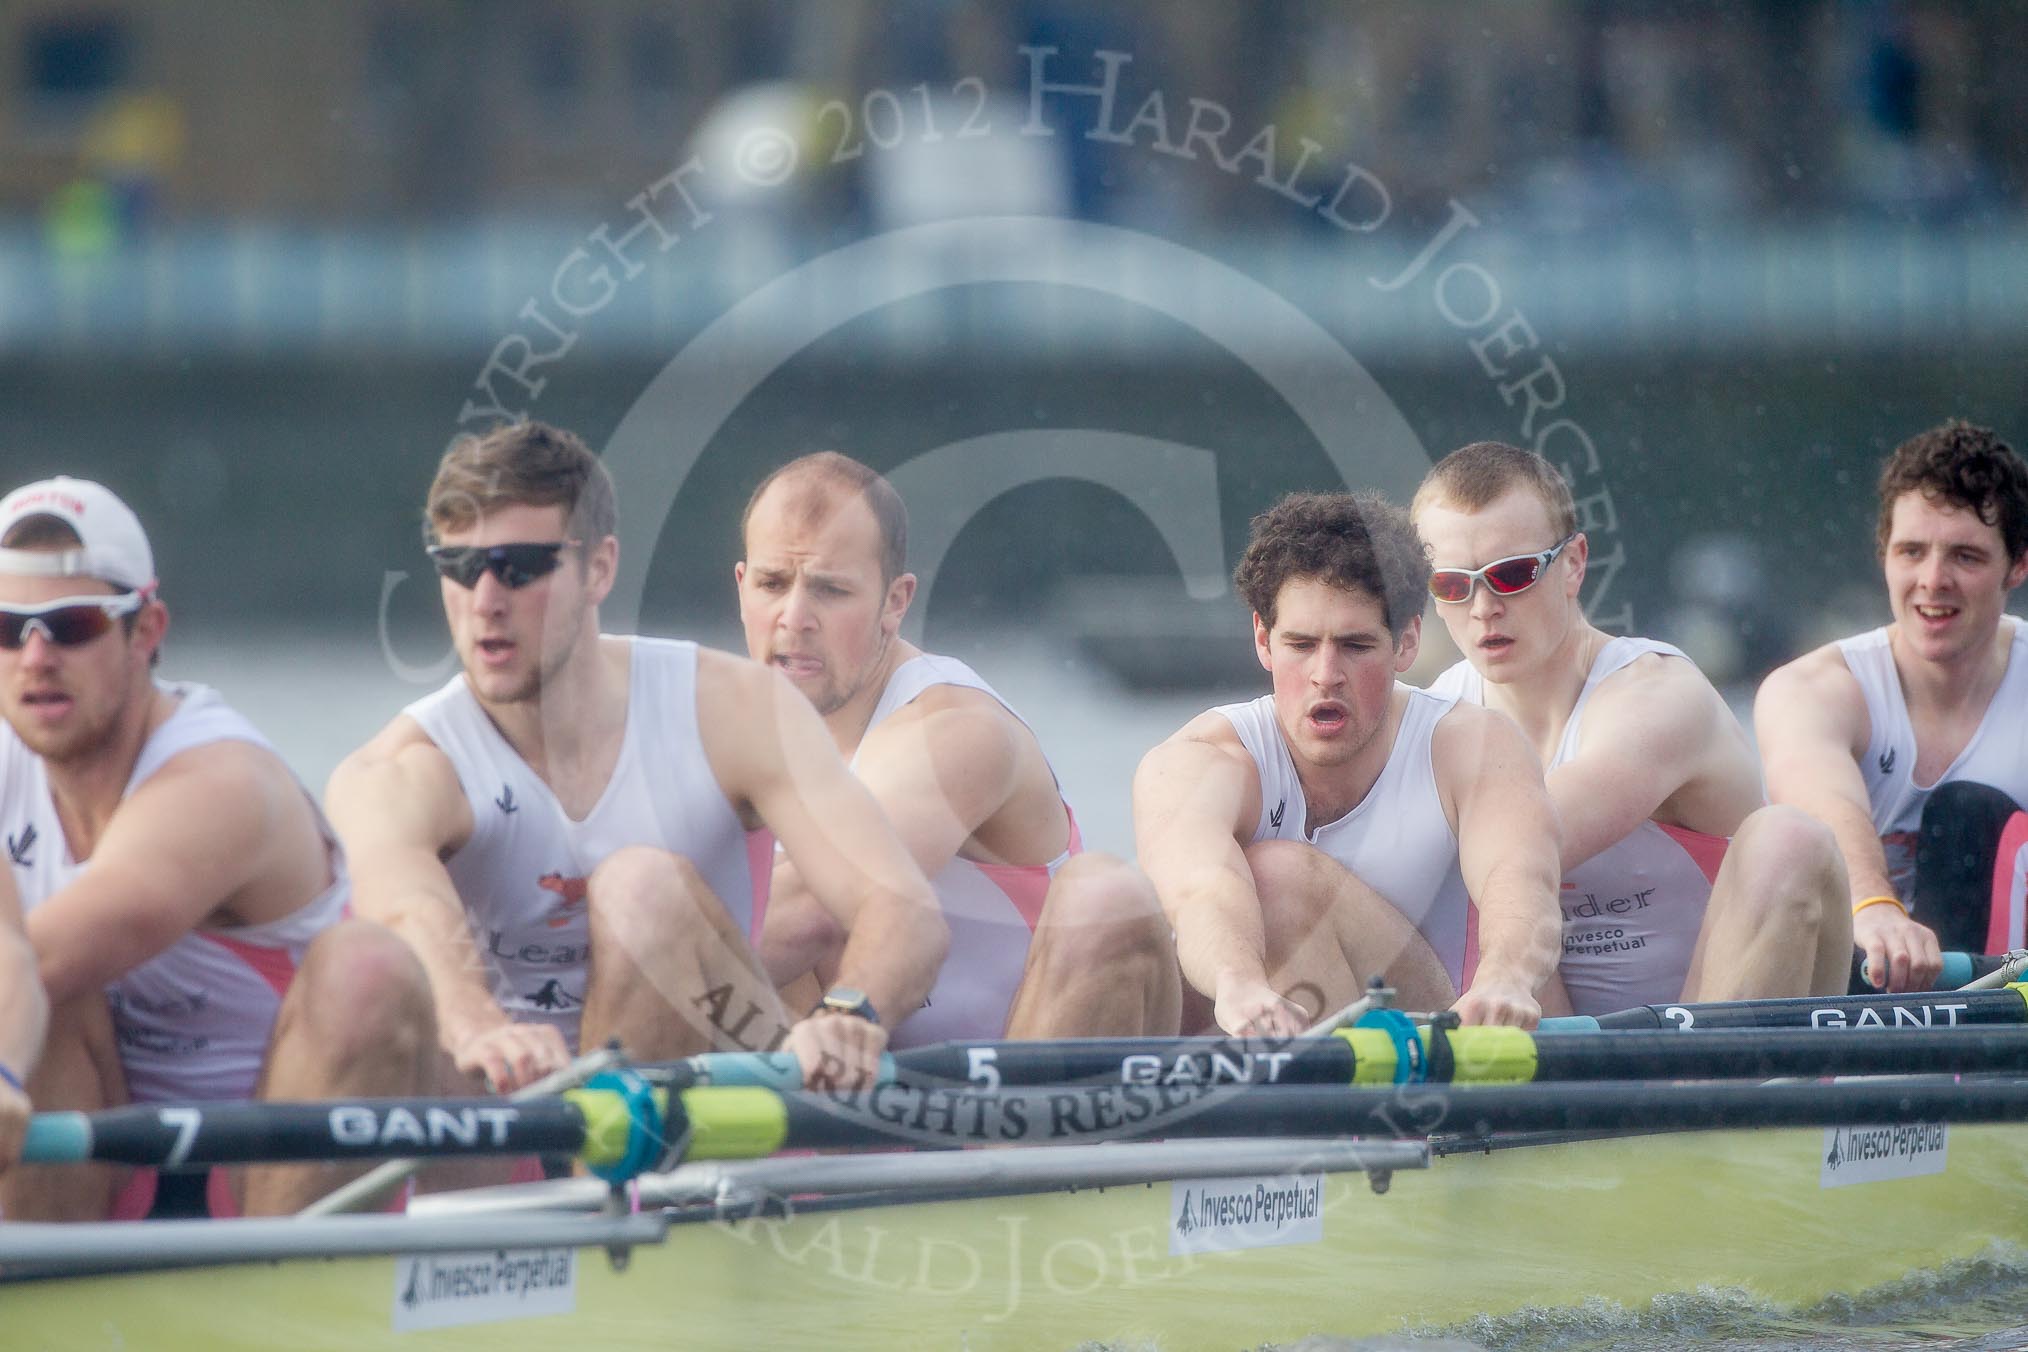 The Boat Race season 2012 - fixture CUBC vs Leander: The Leander Club Eight:  Sean Dixon, Tom Clark, John Clay, Will Gray, Sam Whittaker, and bow Oliver Holt..
River Thames between Putney and Molesey,
London,
Greater London,
United Kingdom,
on 10 March 2012 at 14:13, image #105